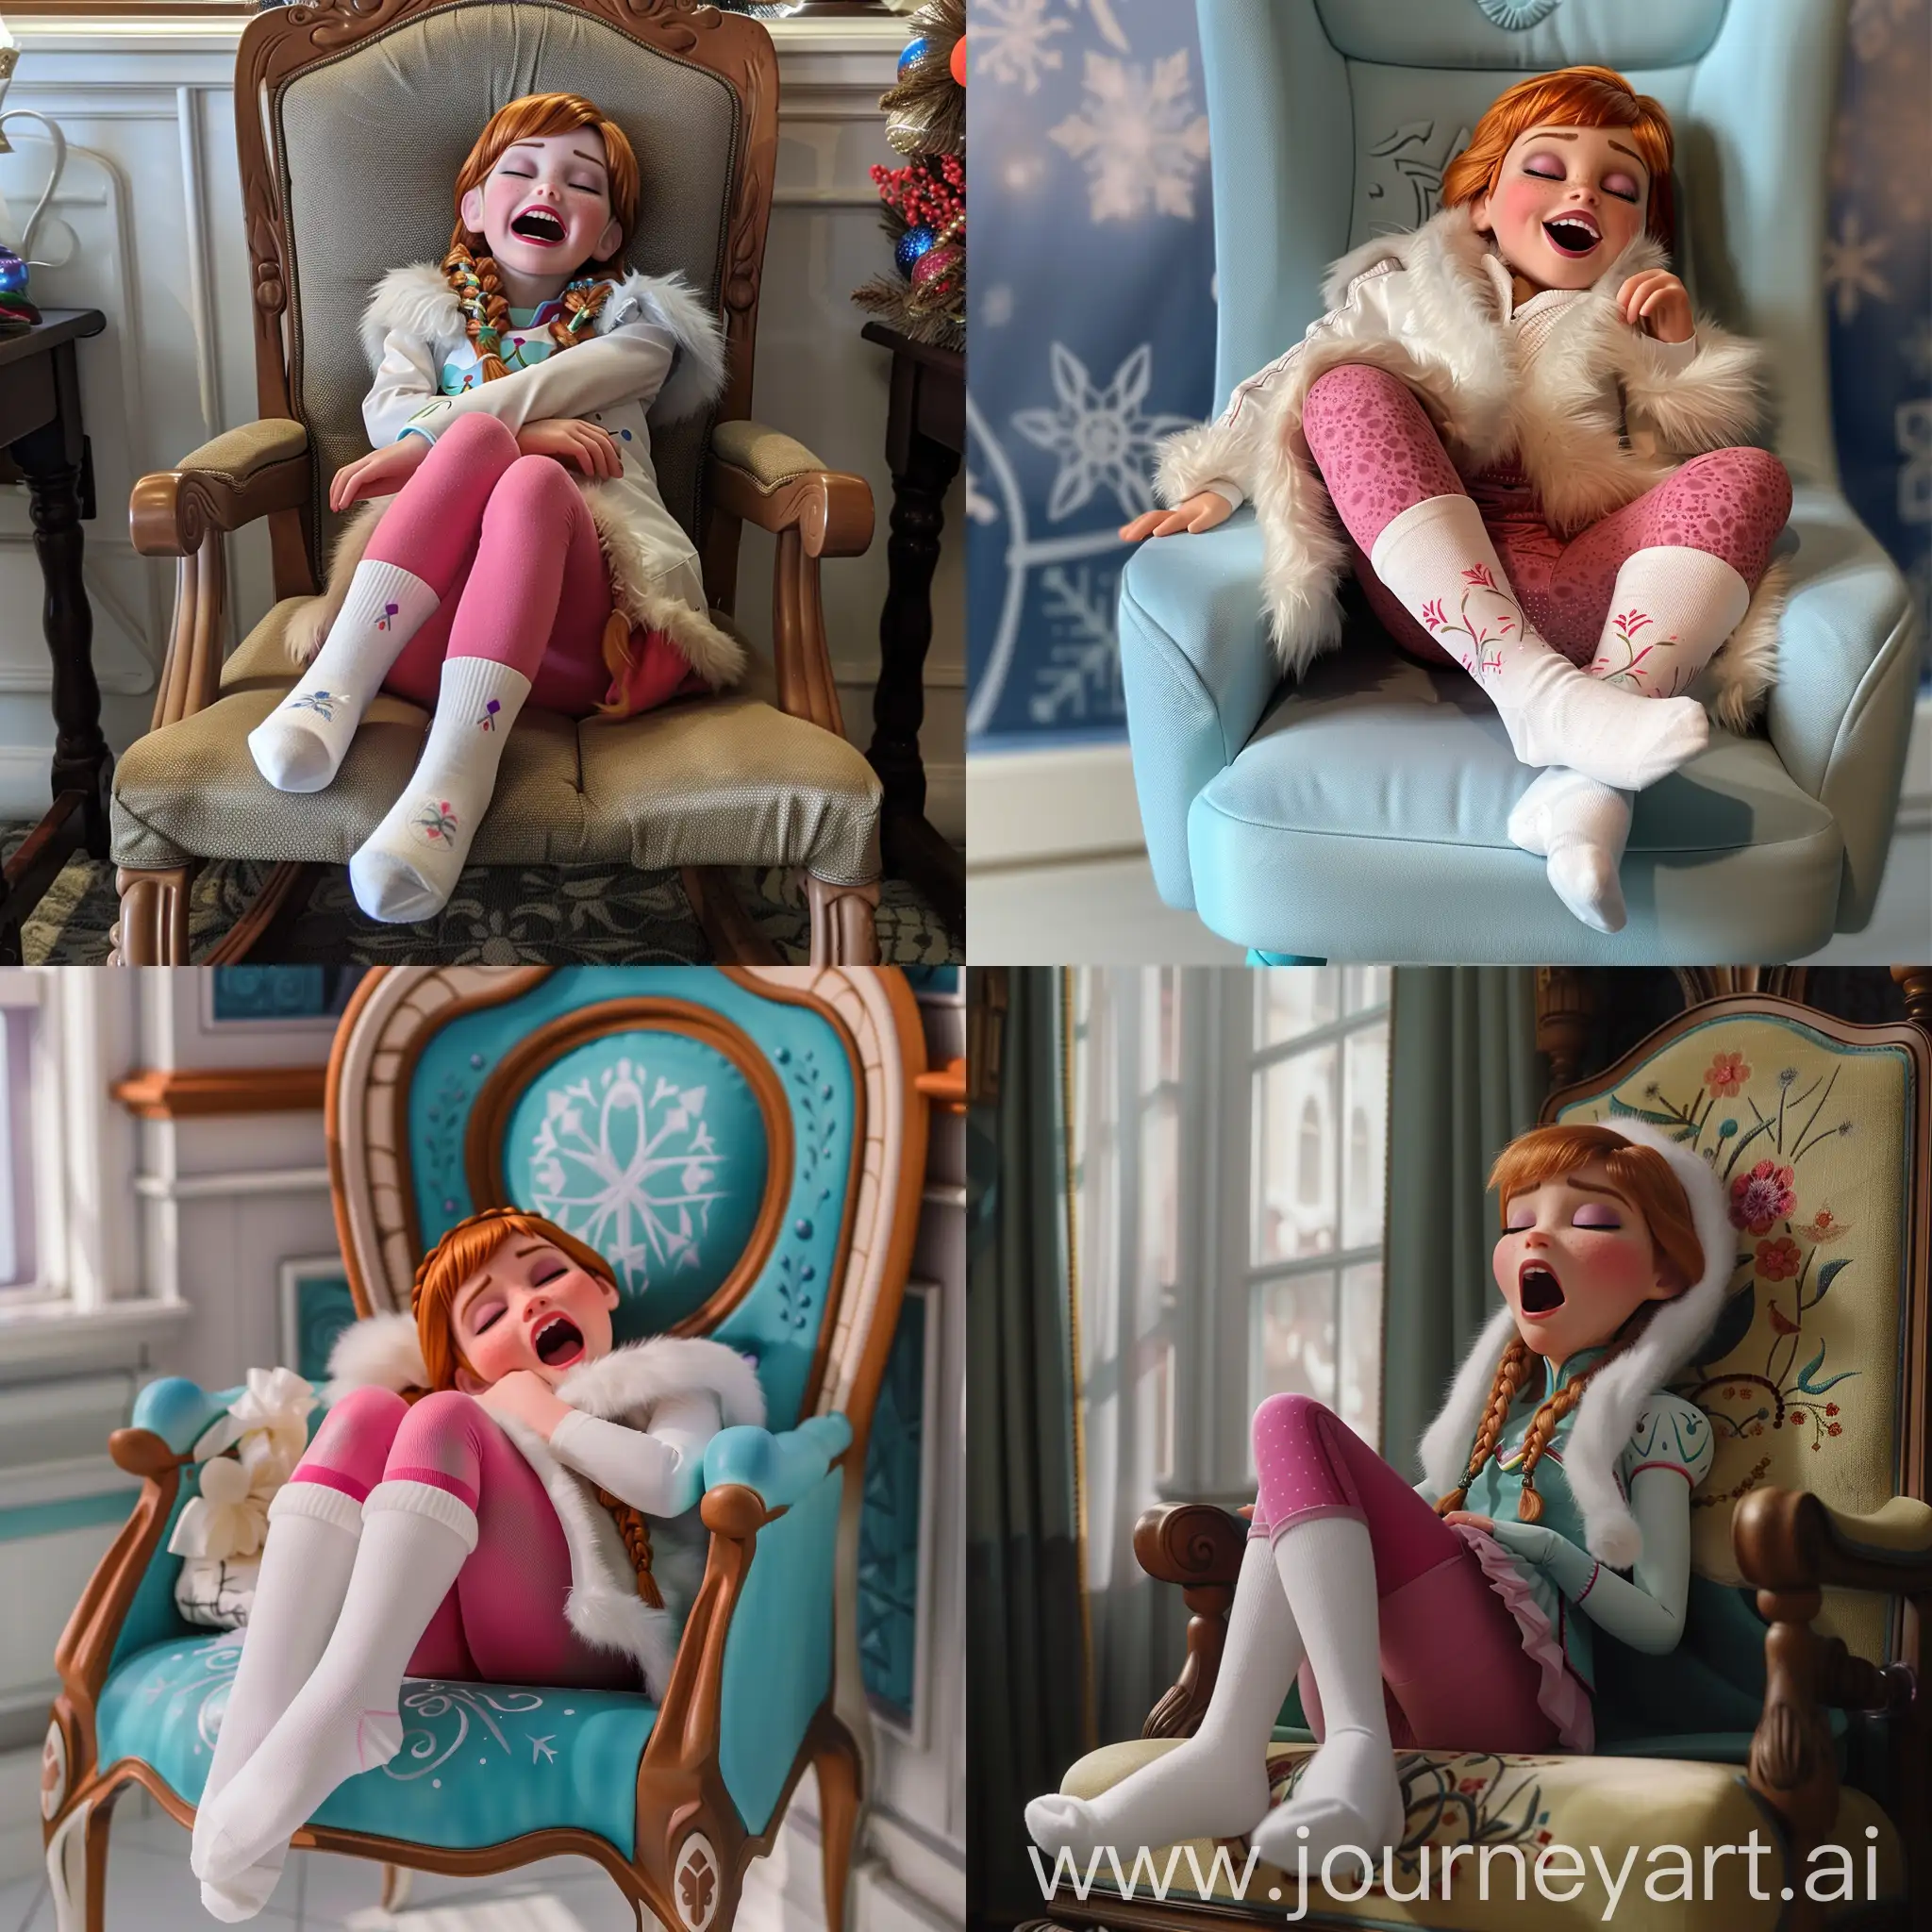 Anna frozen wearing white sock and pink legging, sleeping on her chair with mouth open